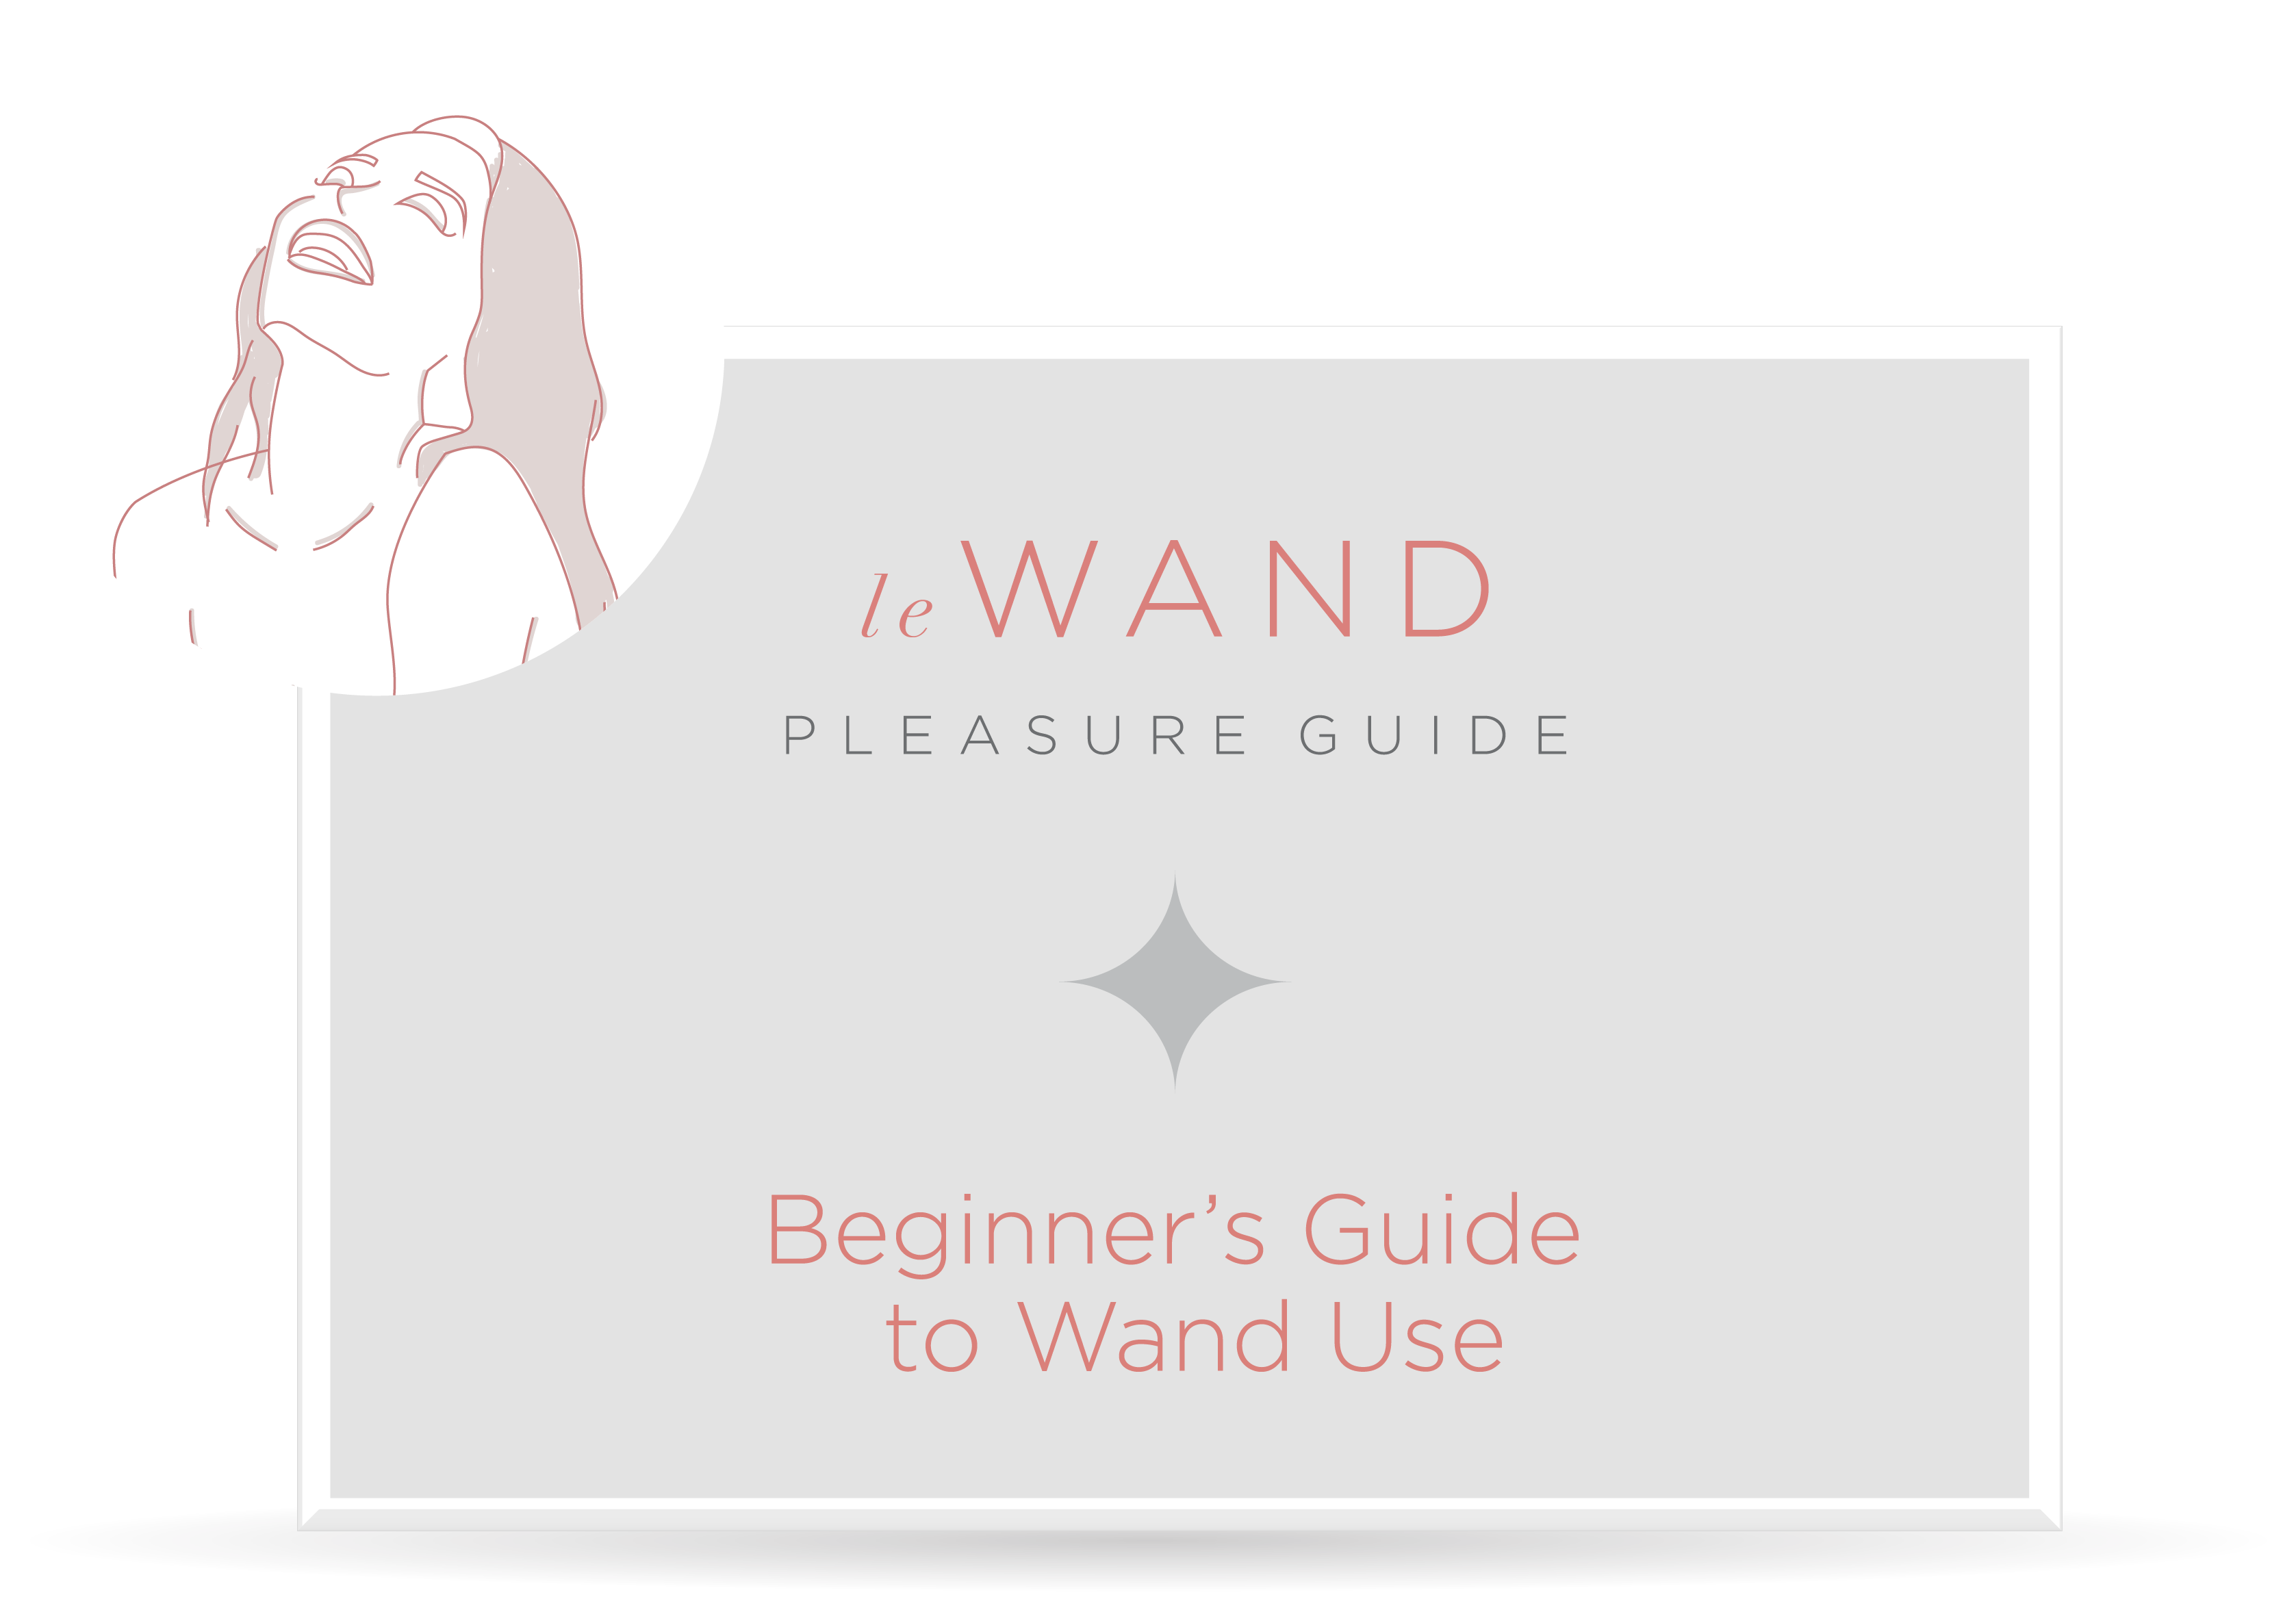 Every purchase of the Le Wand Petite Massager includes a Beginner's Guide to Wand Use